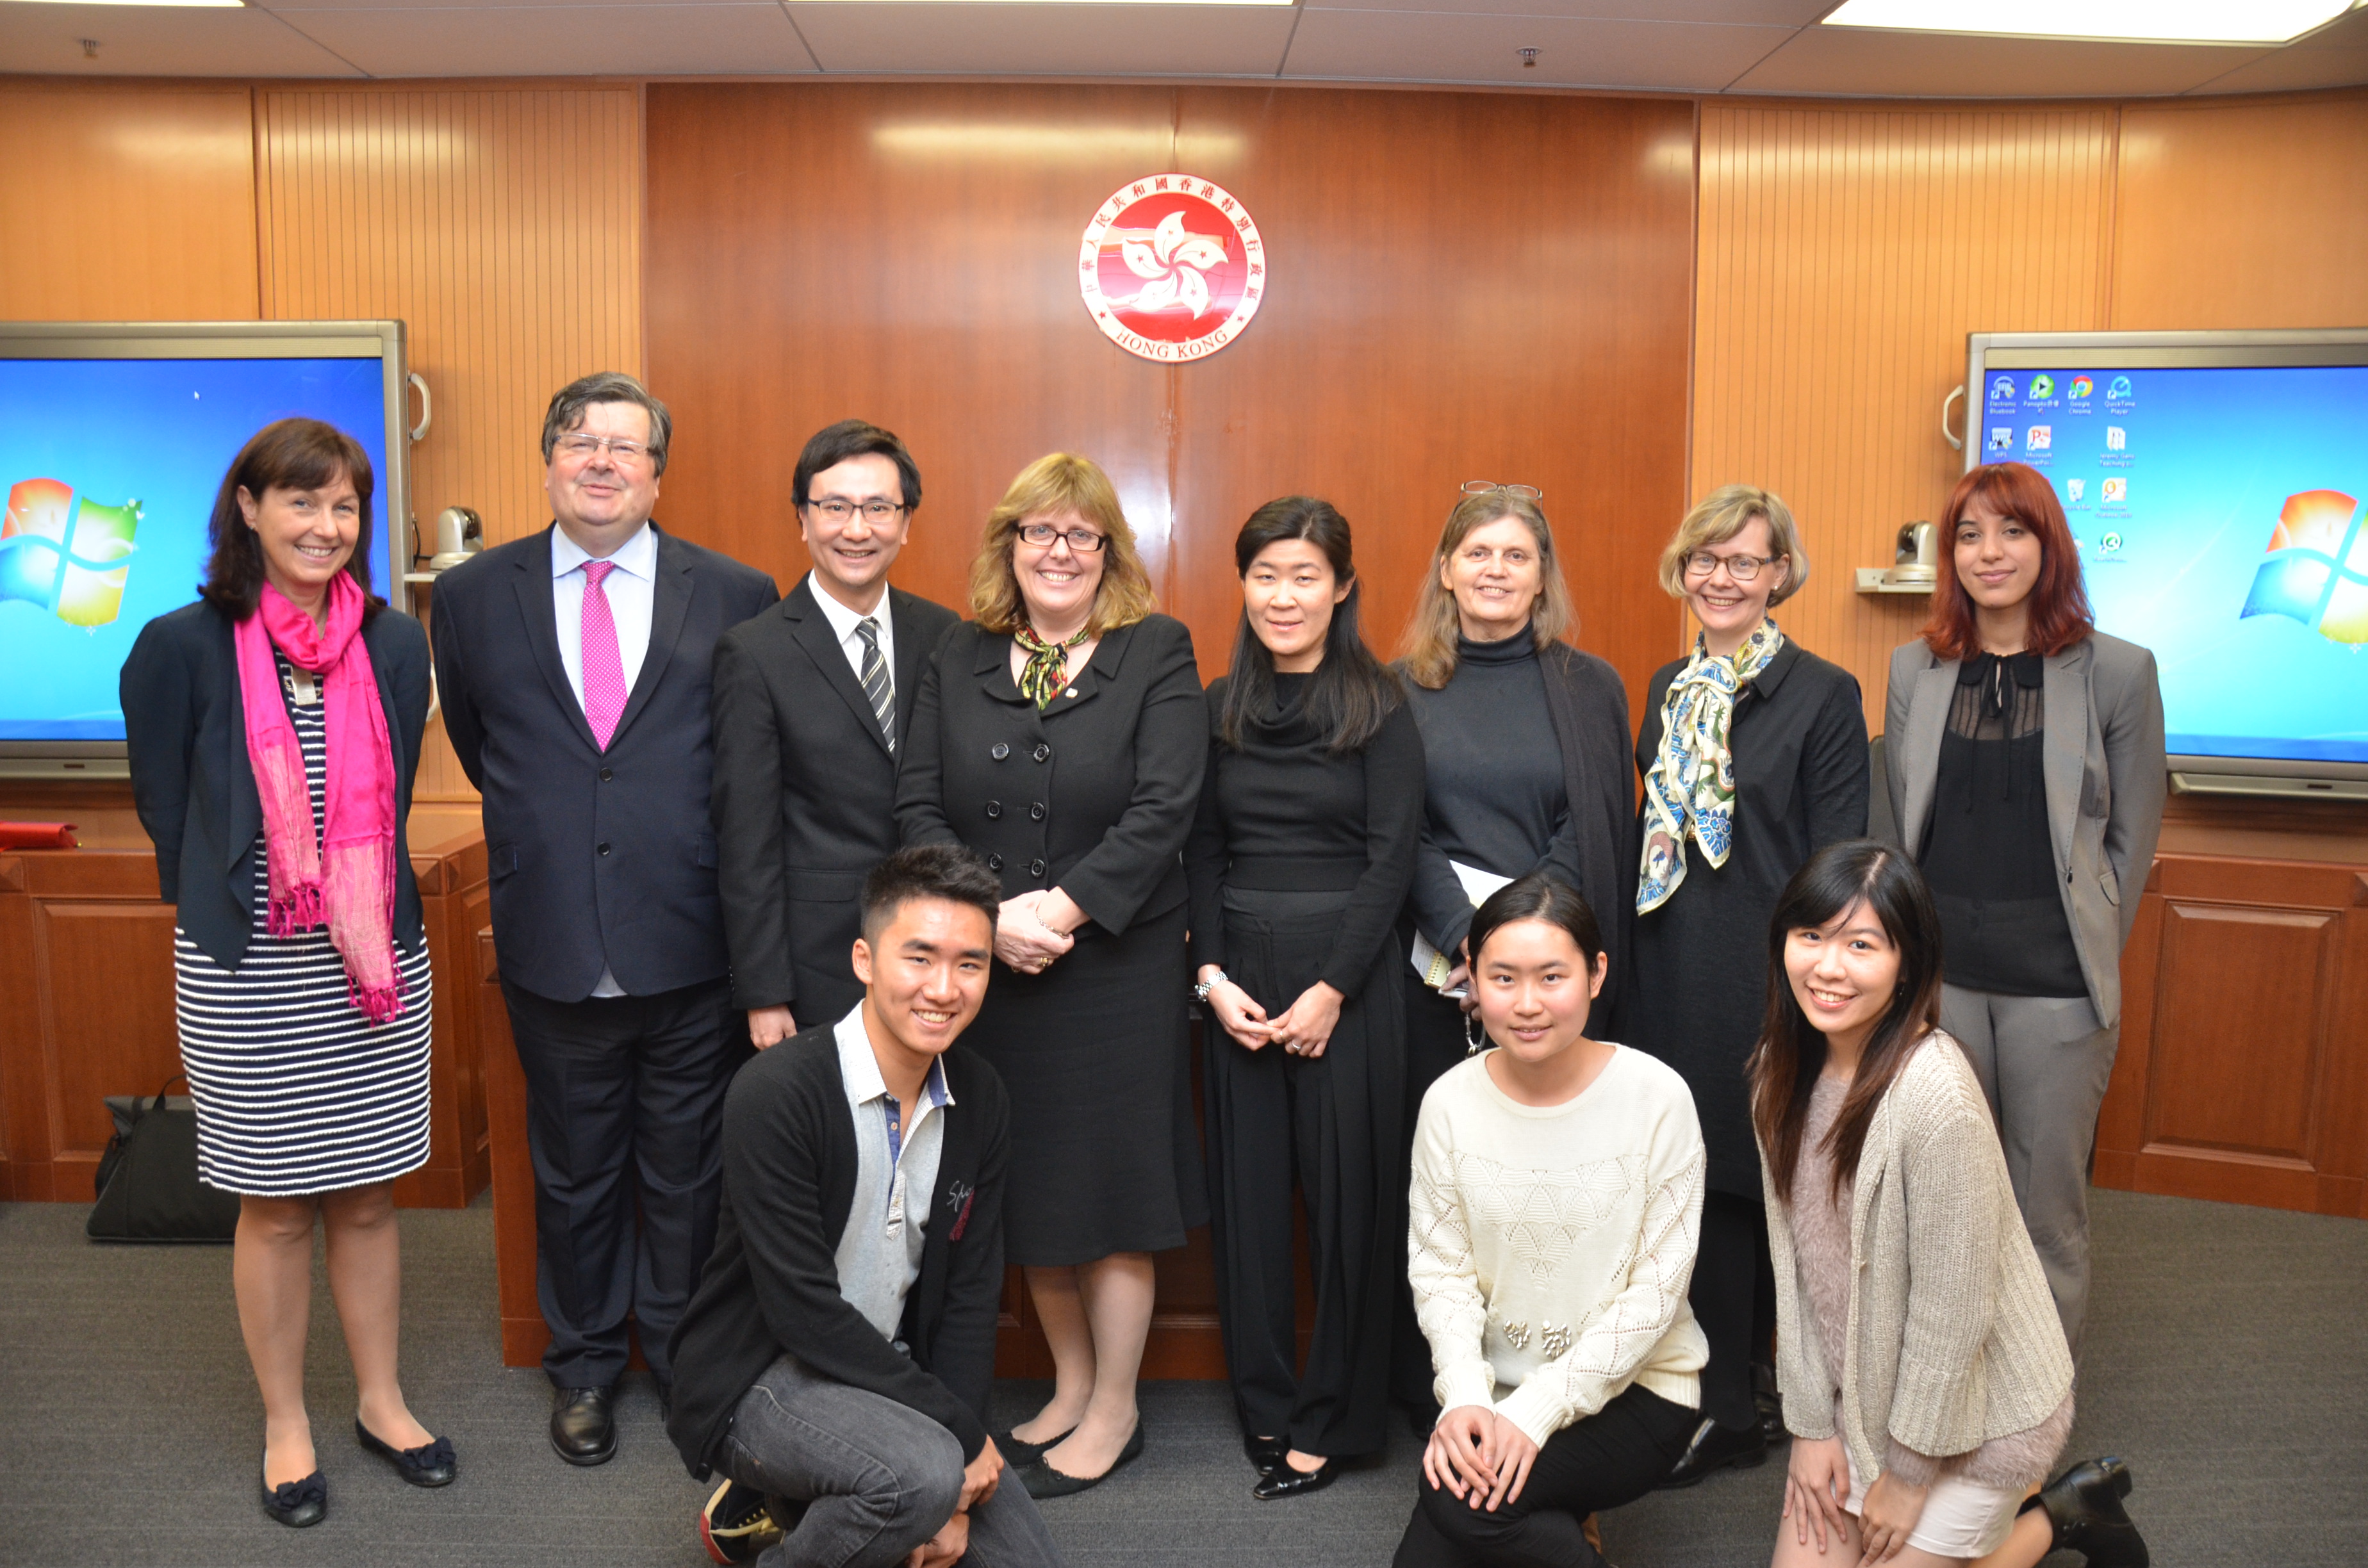 Group photo of HKU and TCD staff and nominated exchange students from HKU